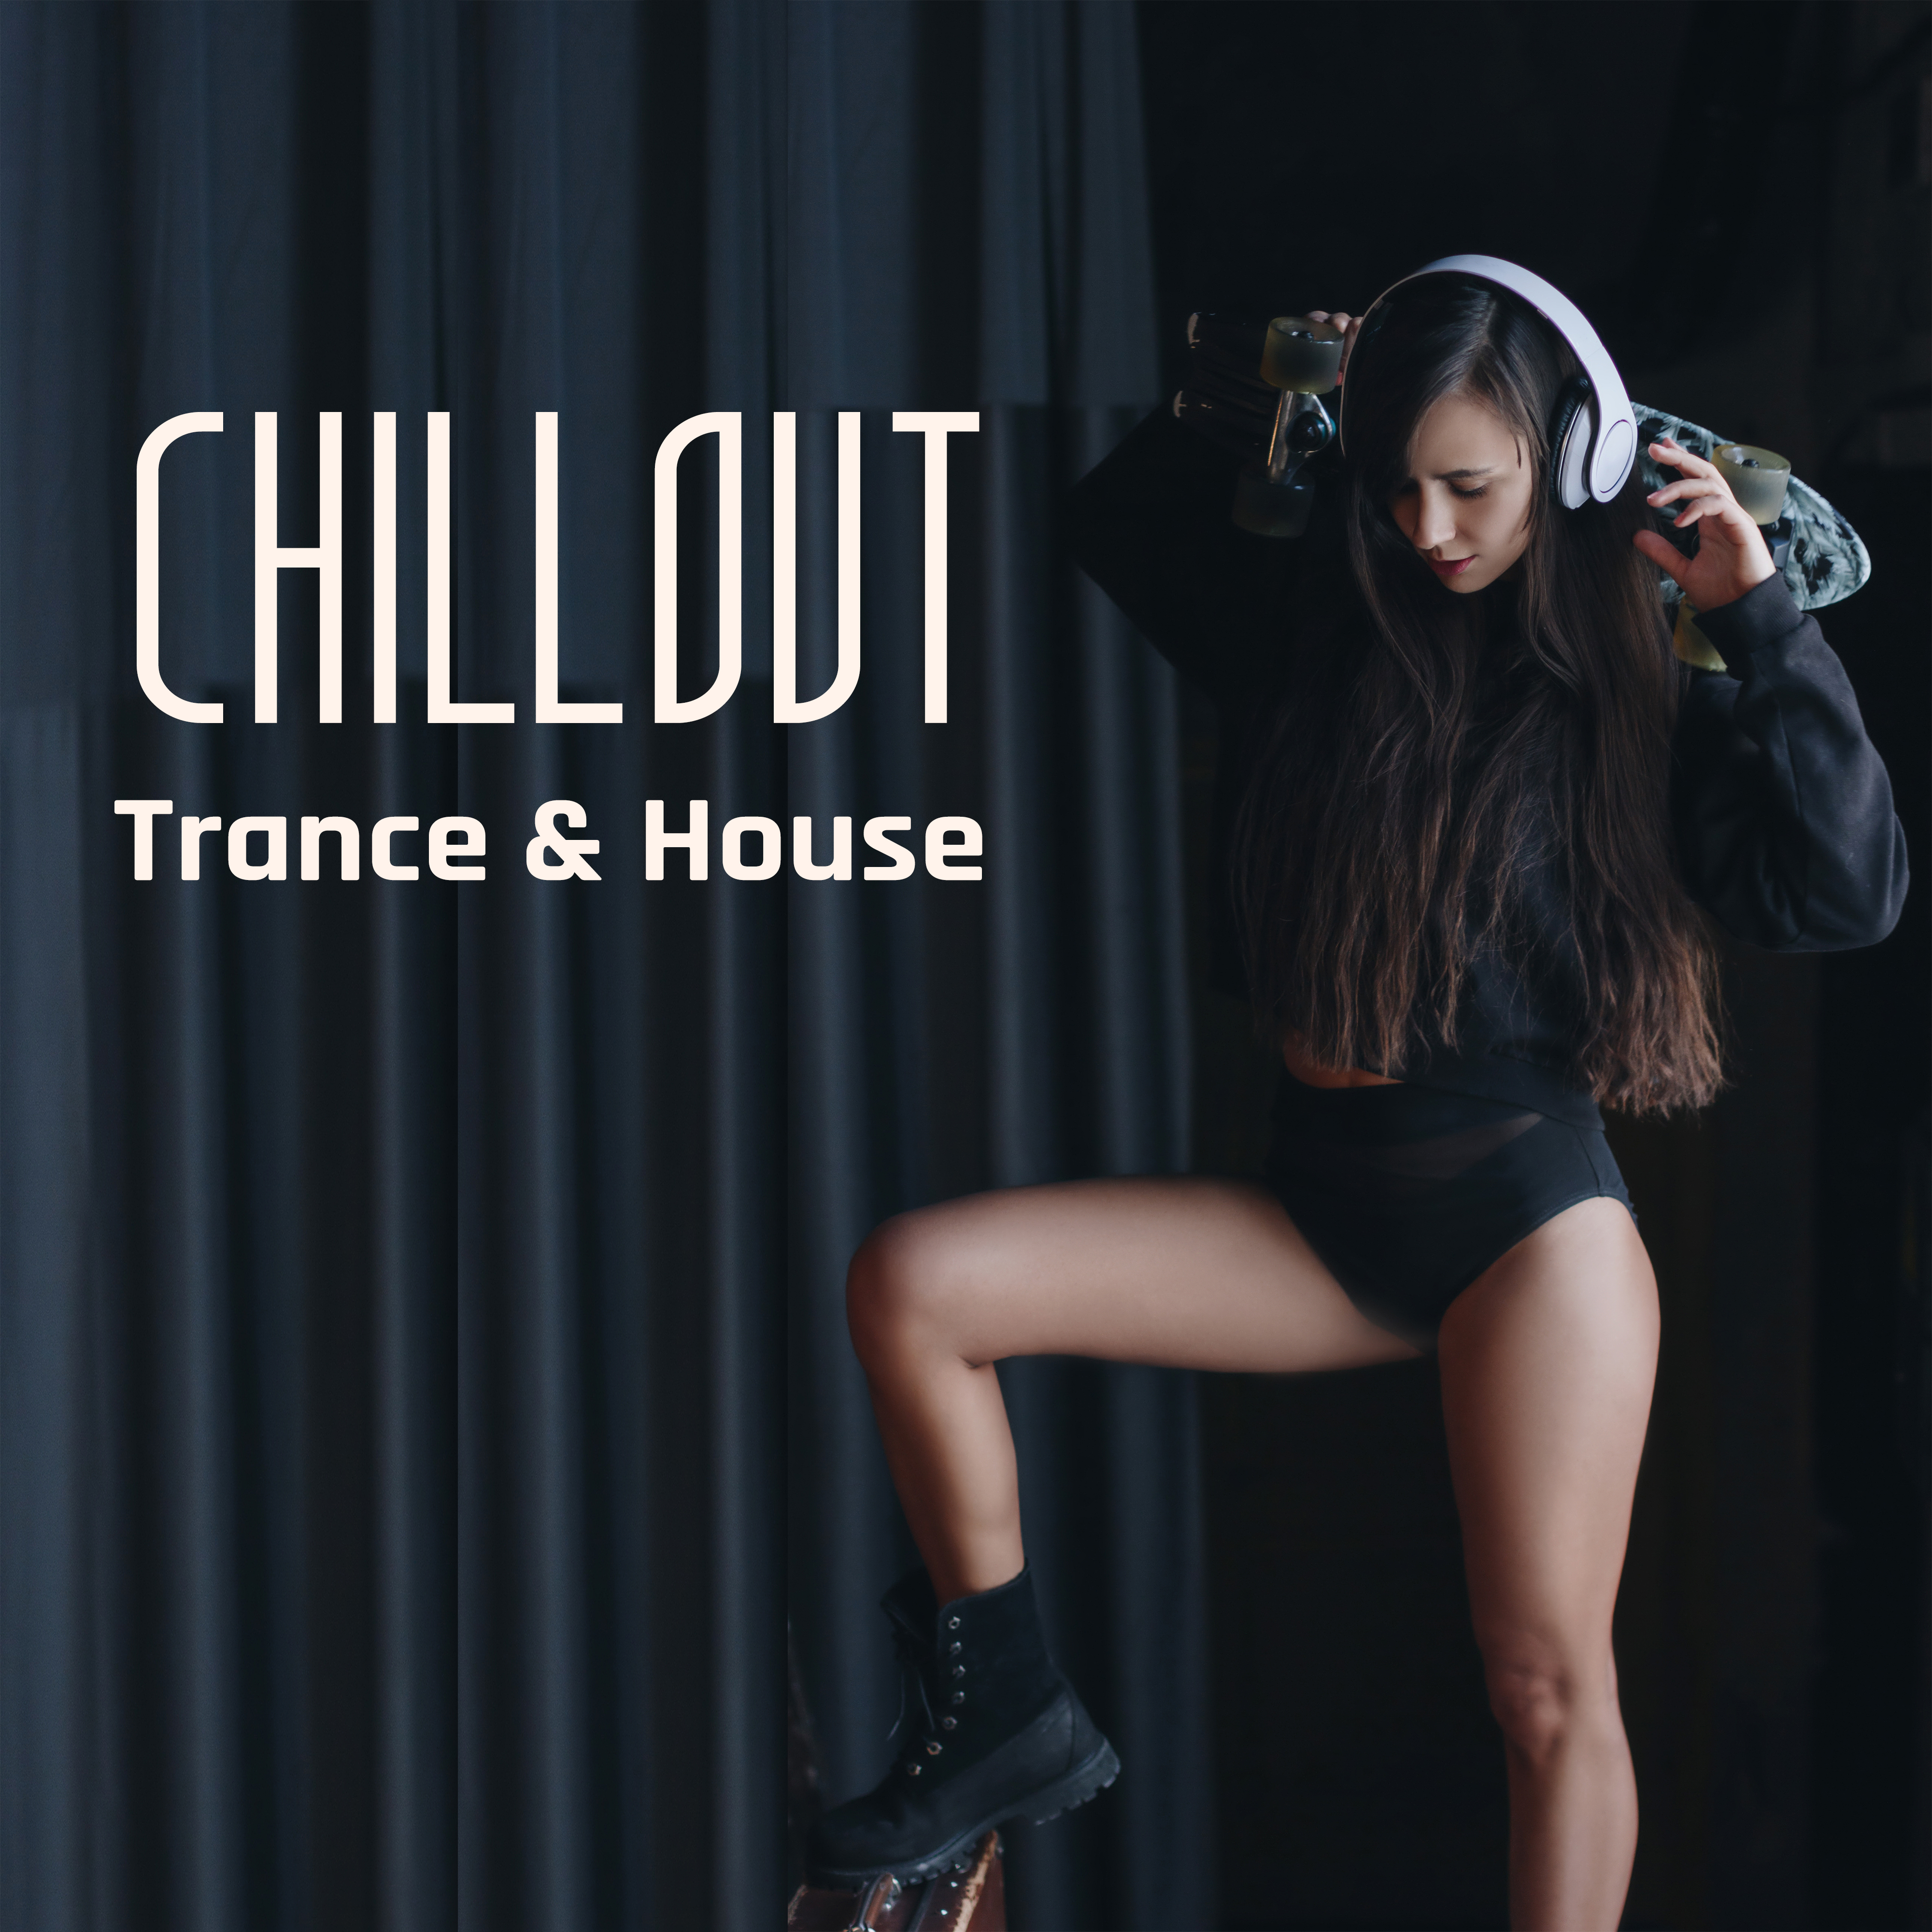 Chillout Trance & House